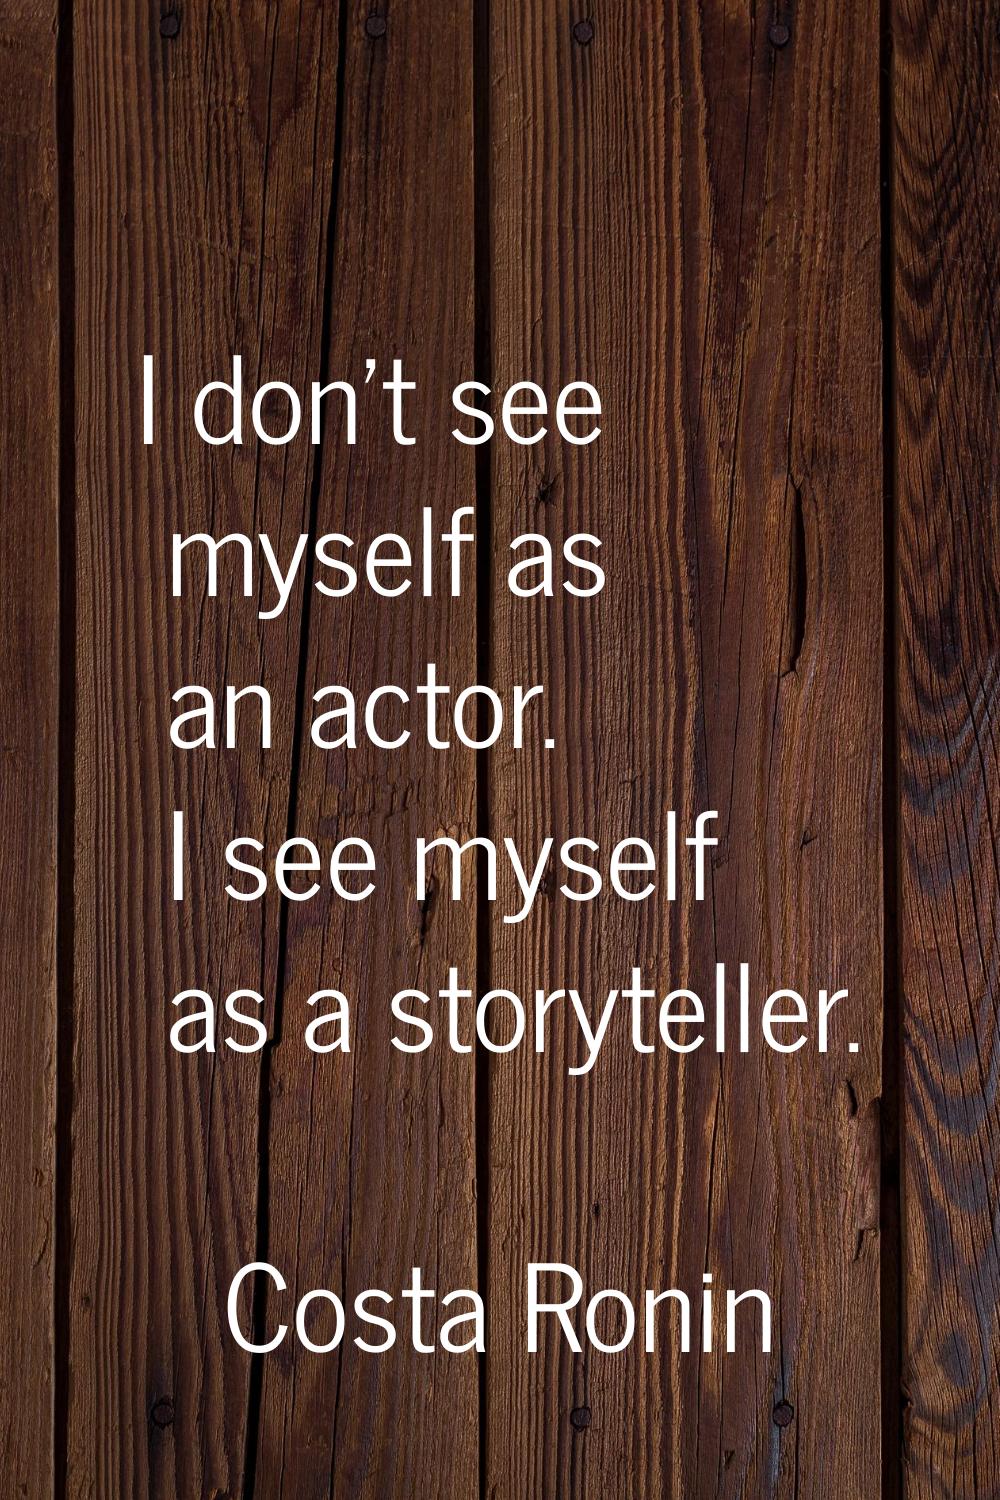 I don't see myself as an actor. I see myself as a storyteller.